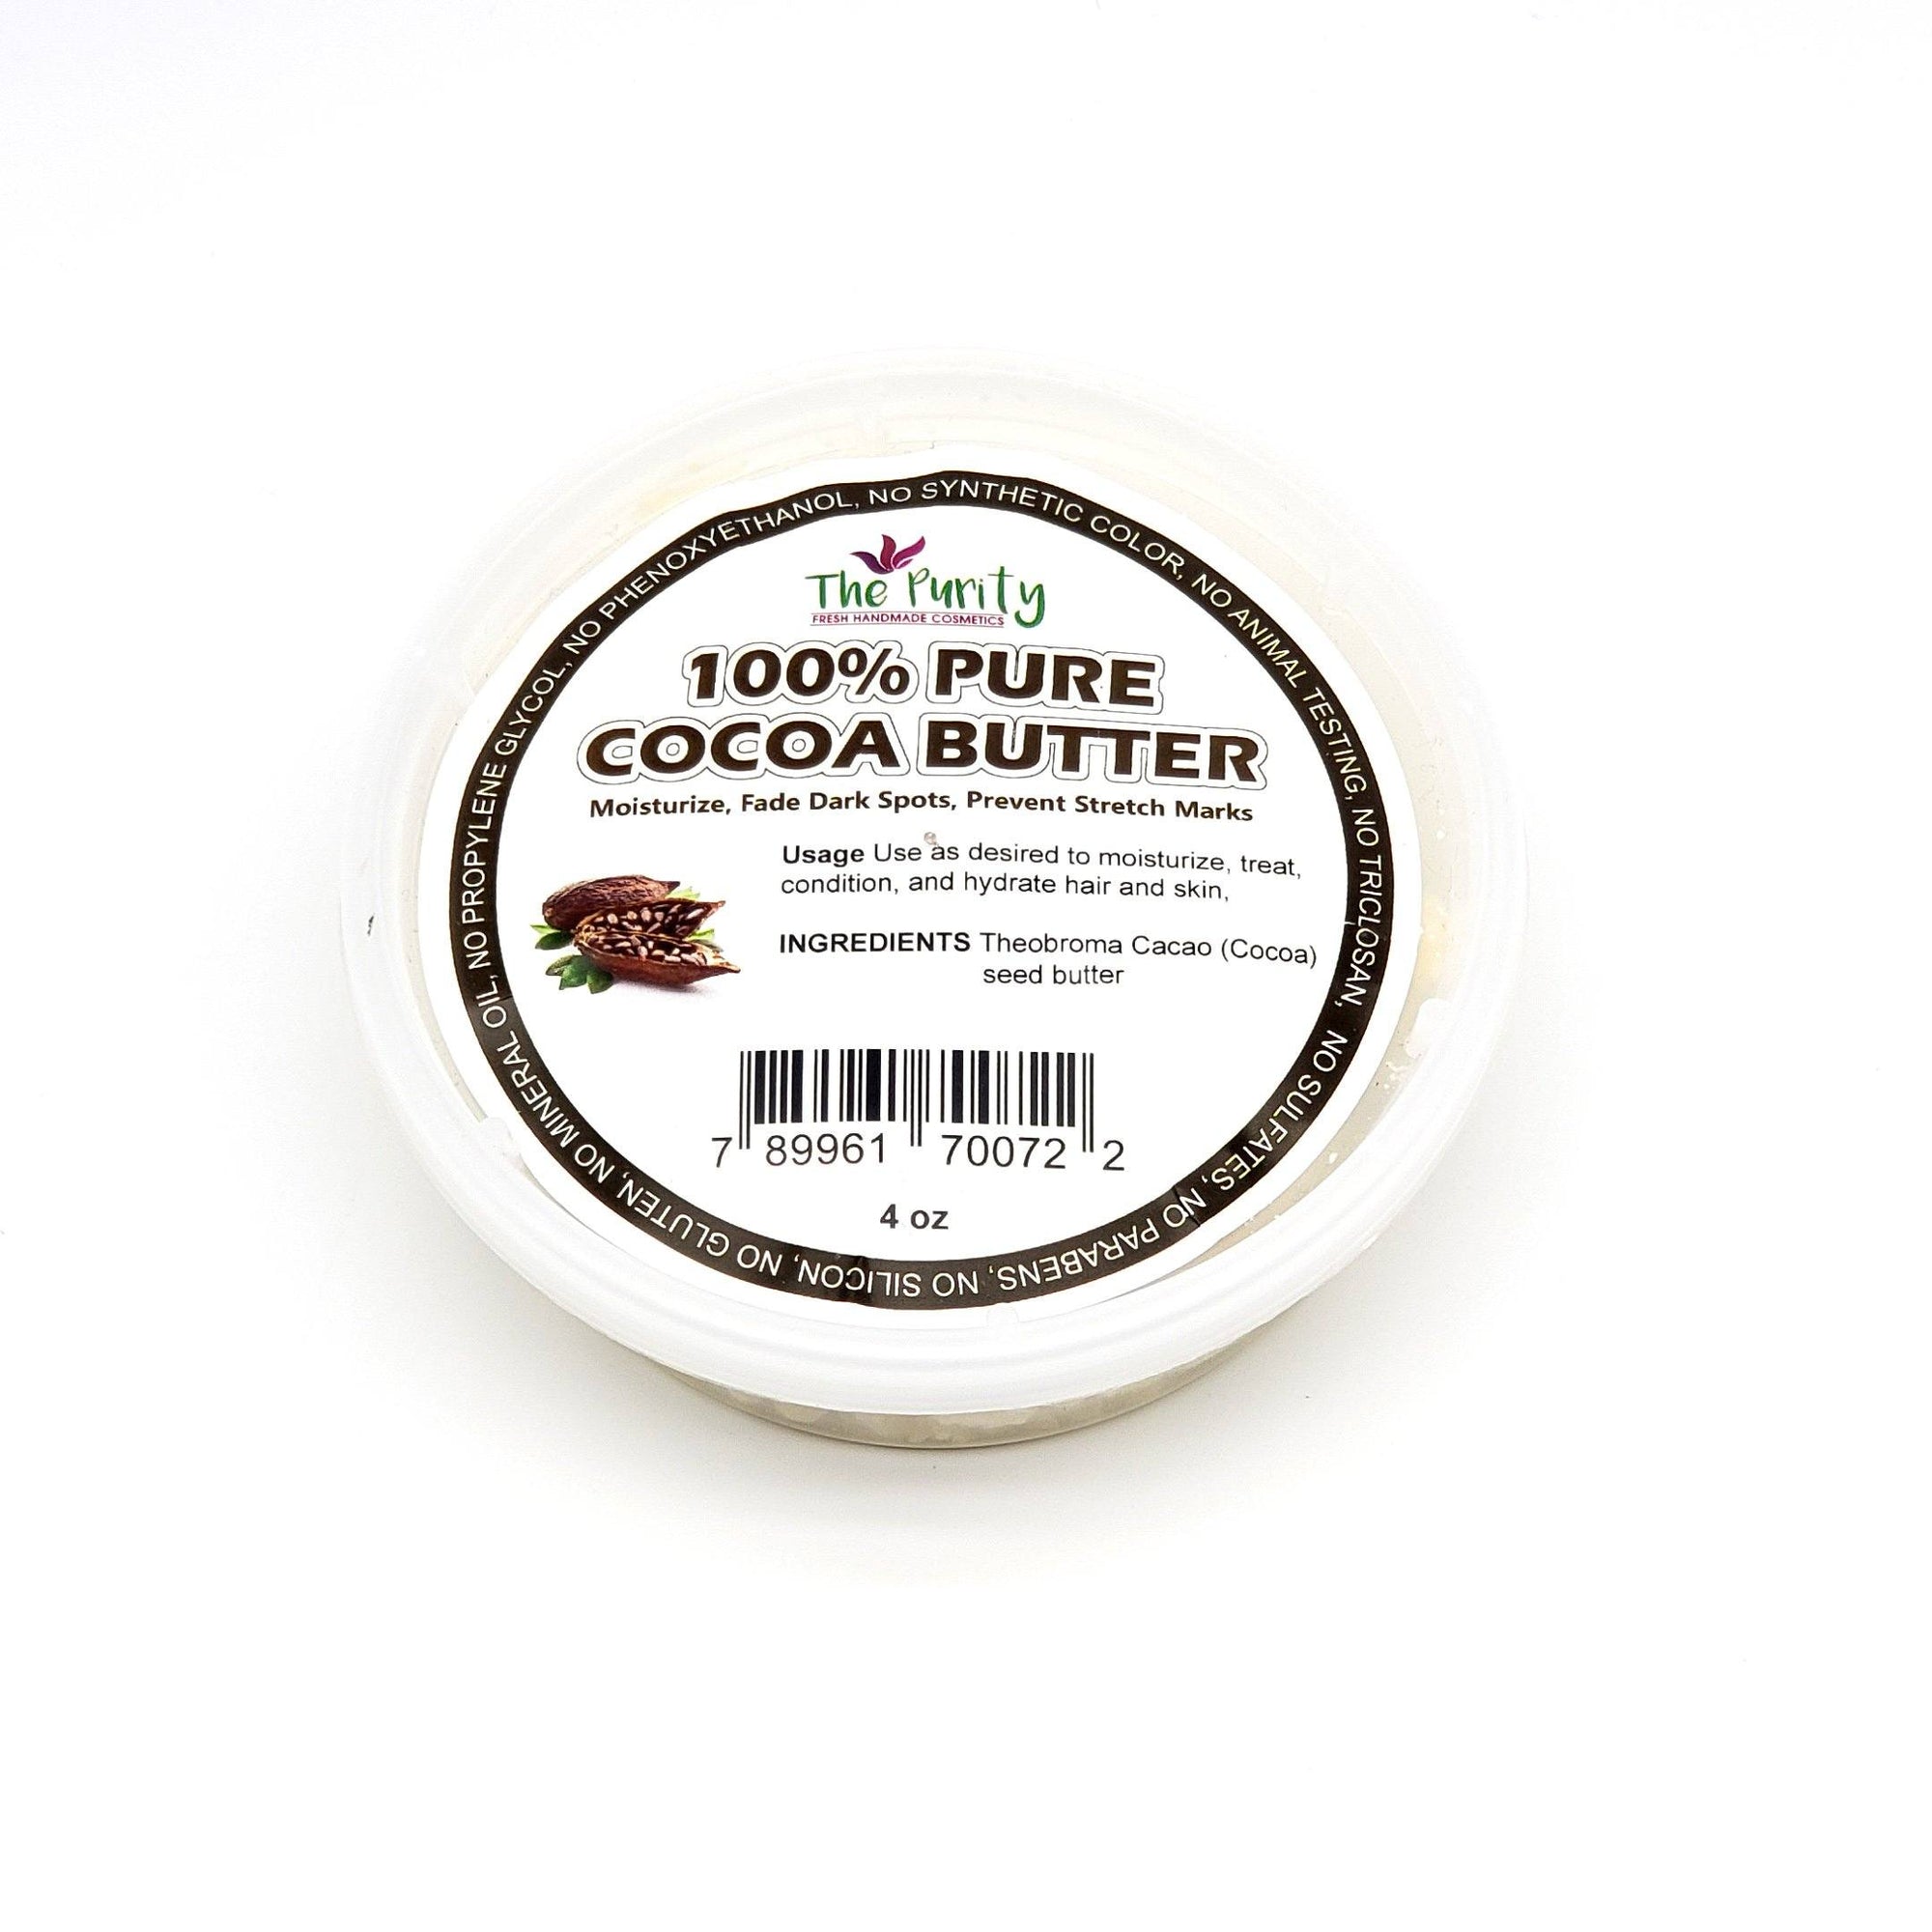 The Purity 100% Pure Cocoa Butter 4oz